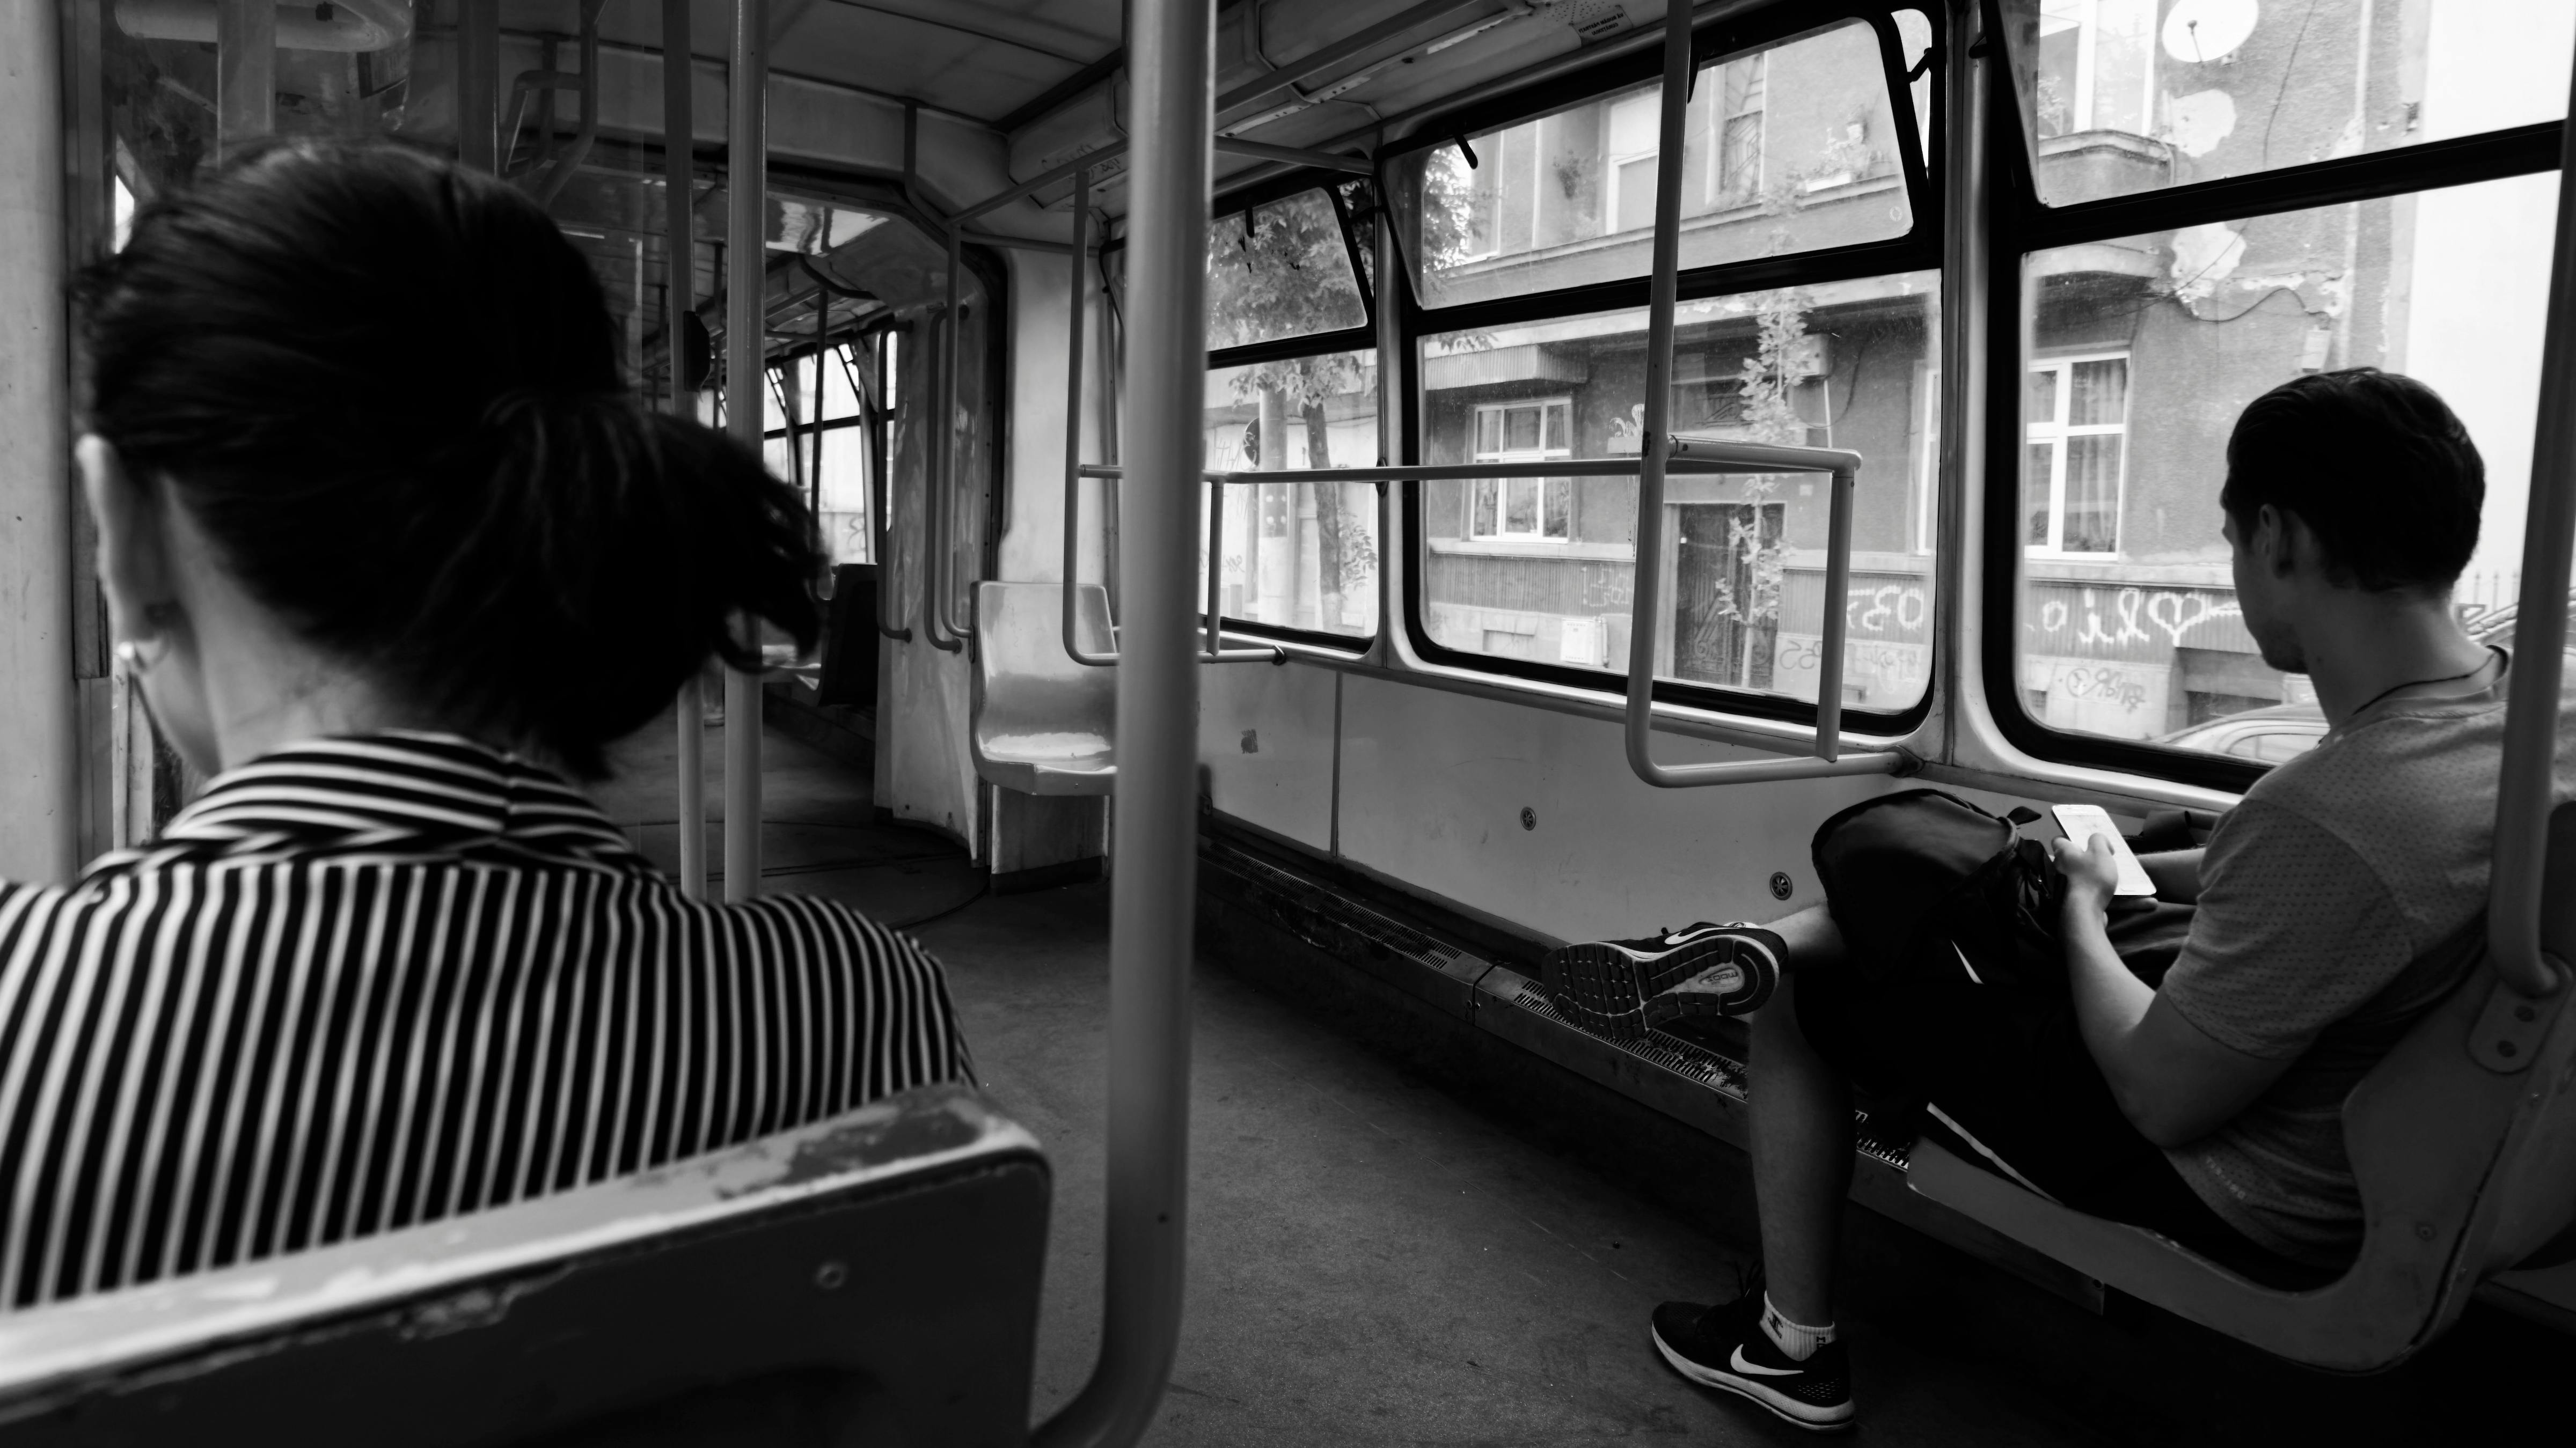 Free stock photo of black and white, persons, public transportation